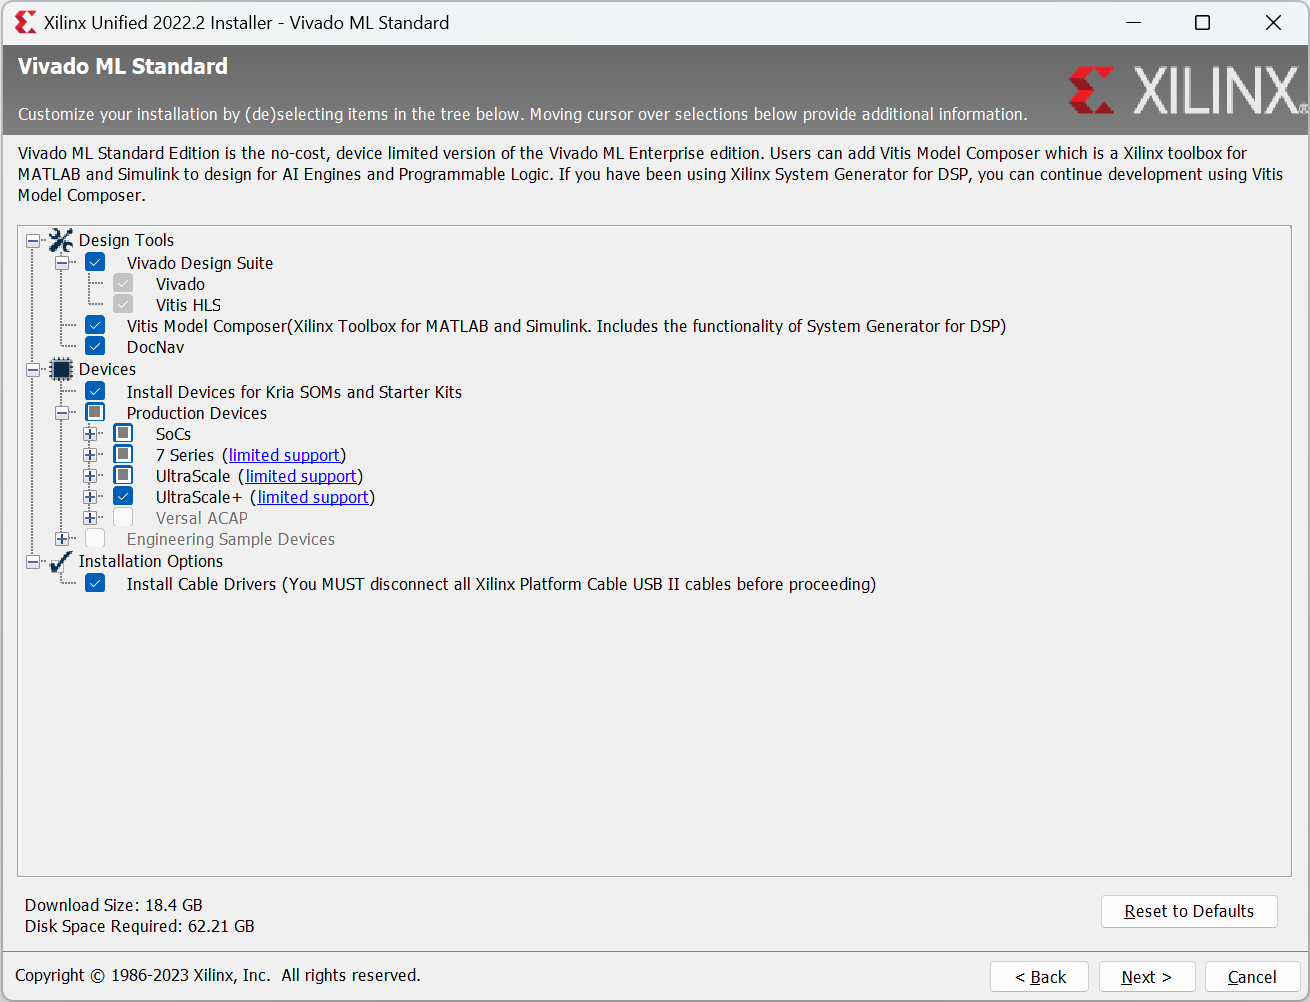 Xilinx Unified Installer "Select Installation Options" Page Screenshot